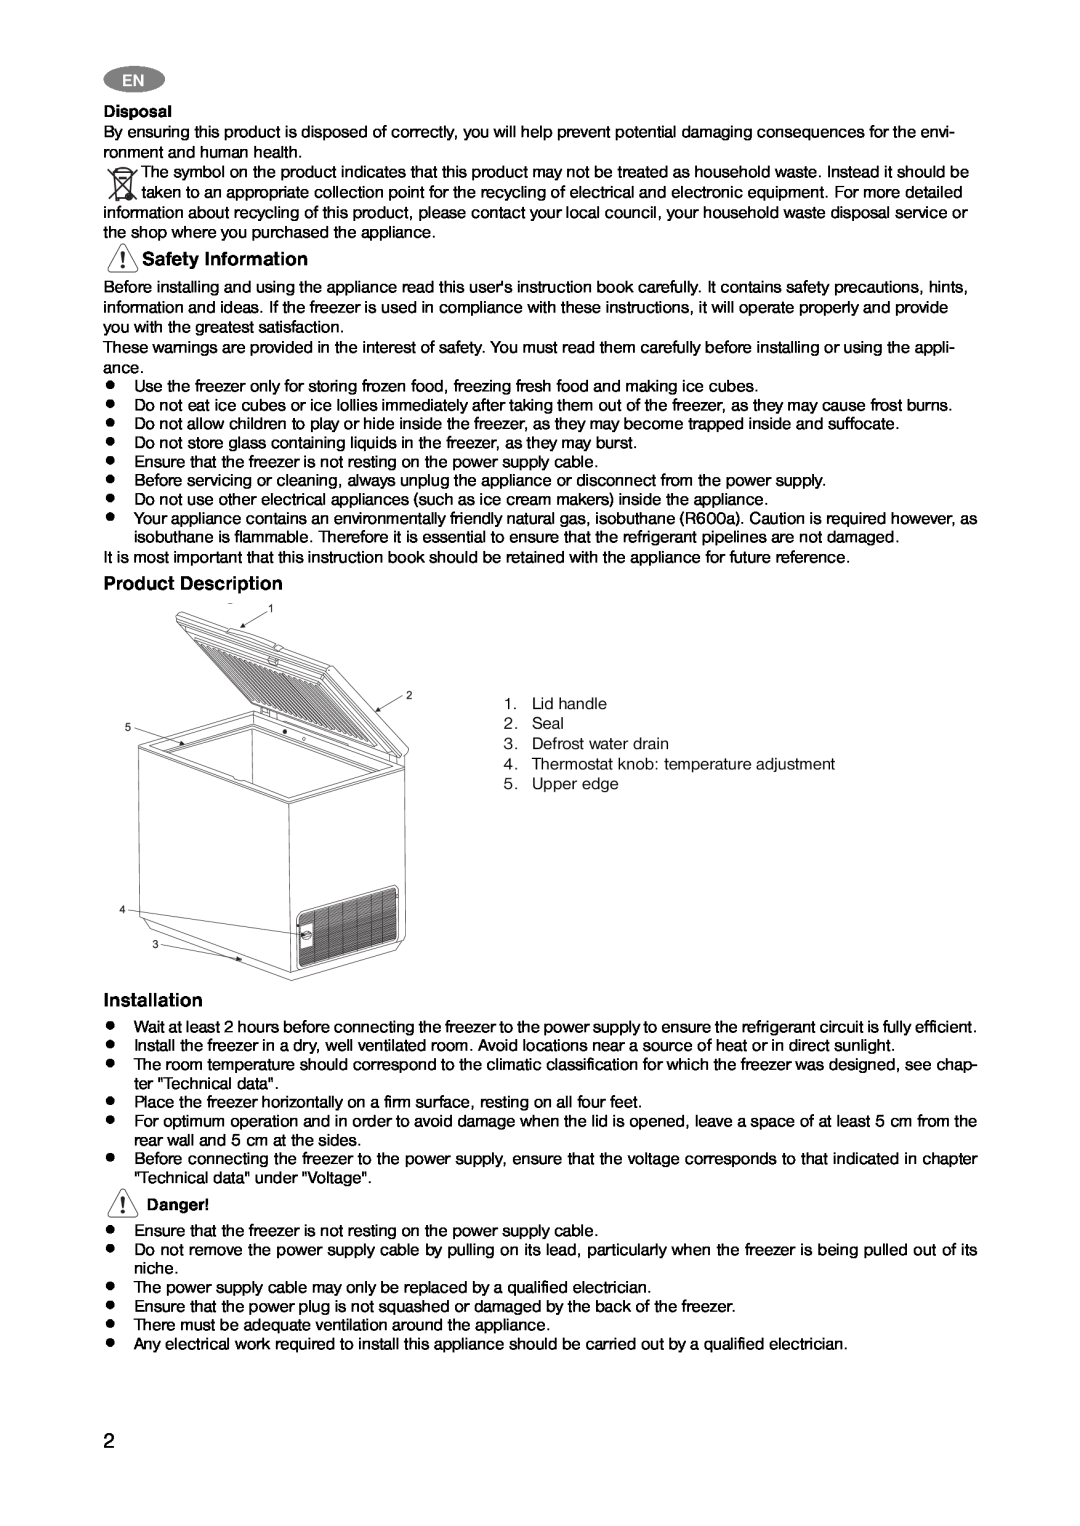 Zanussi ZFC 330 WB, ZFC 340 WB, ZFC 321 WB Safety Information, Product Description, Installation, Disposal, Danger 